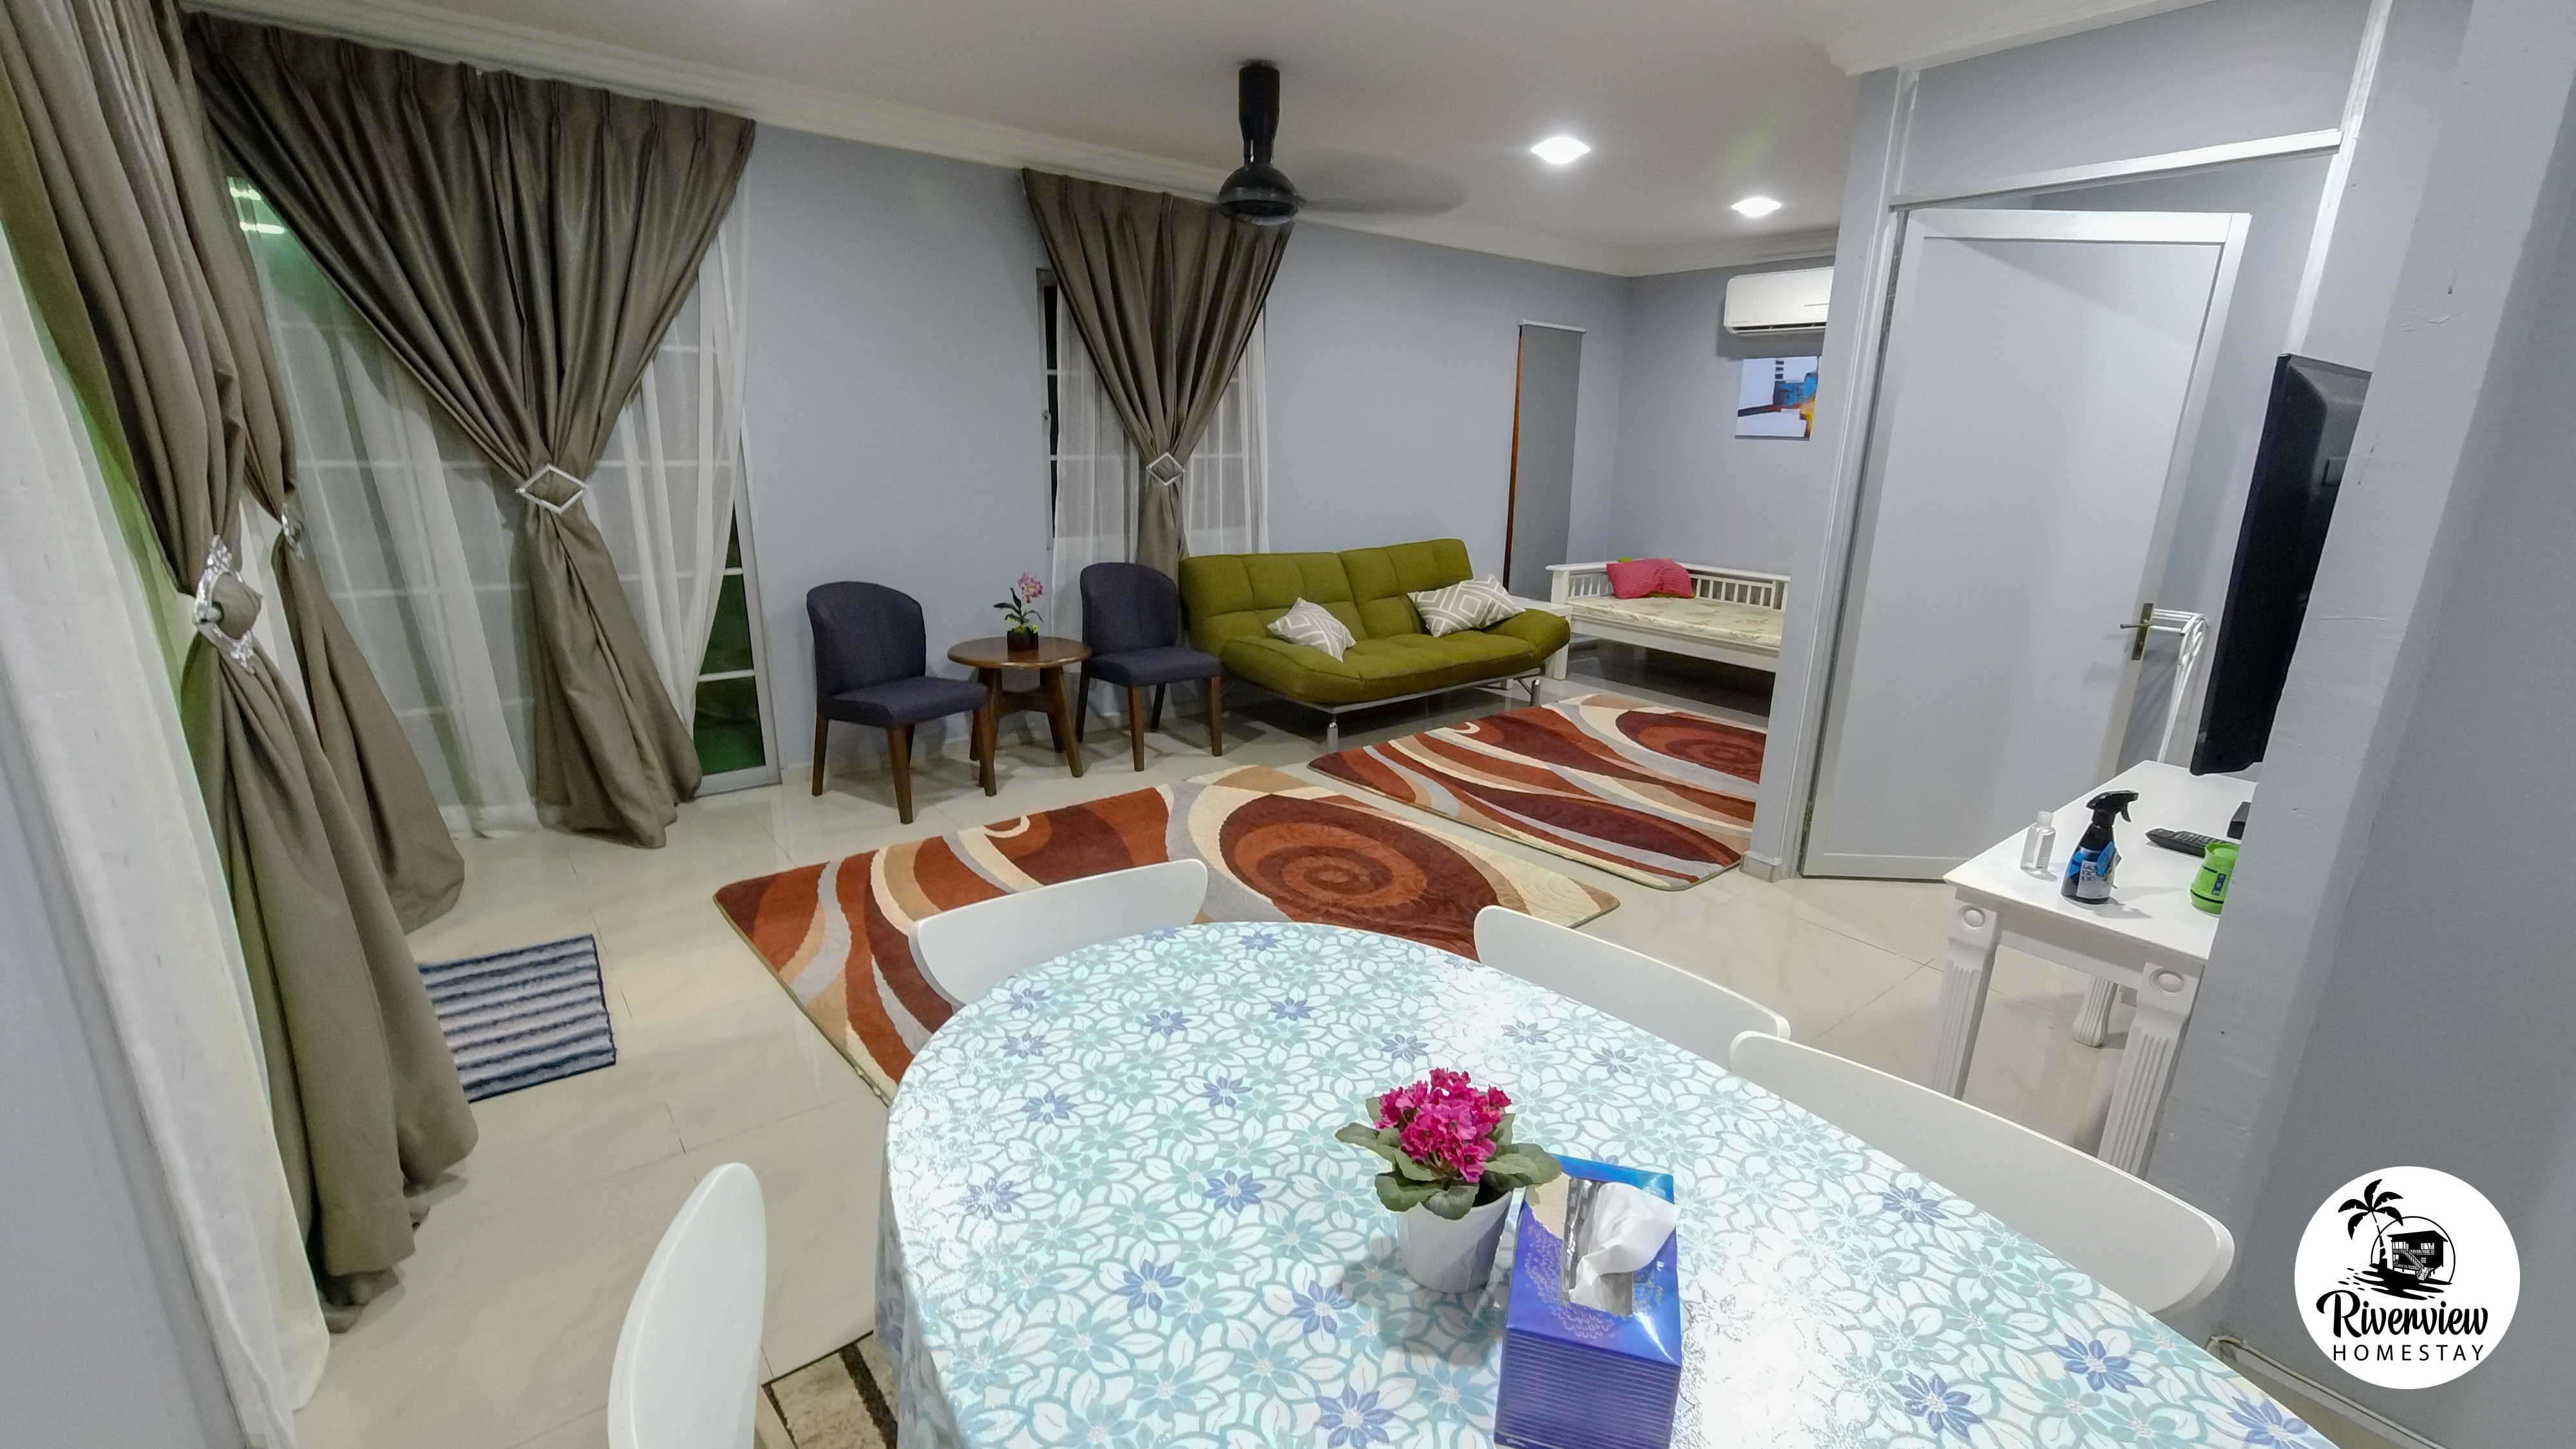 Homestay perlis riverview Facebook